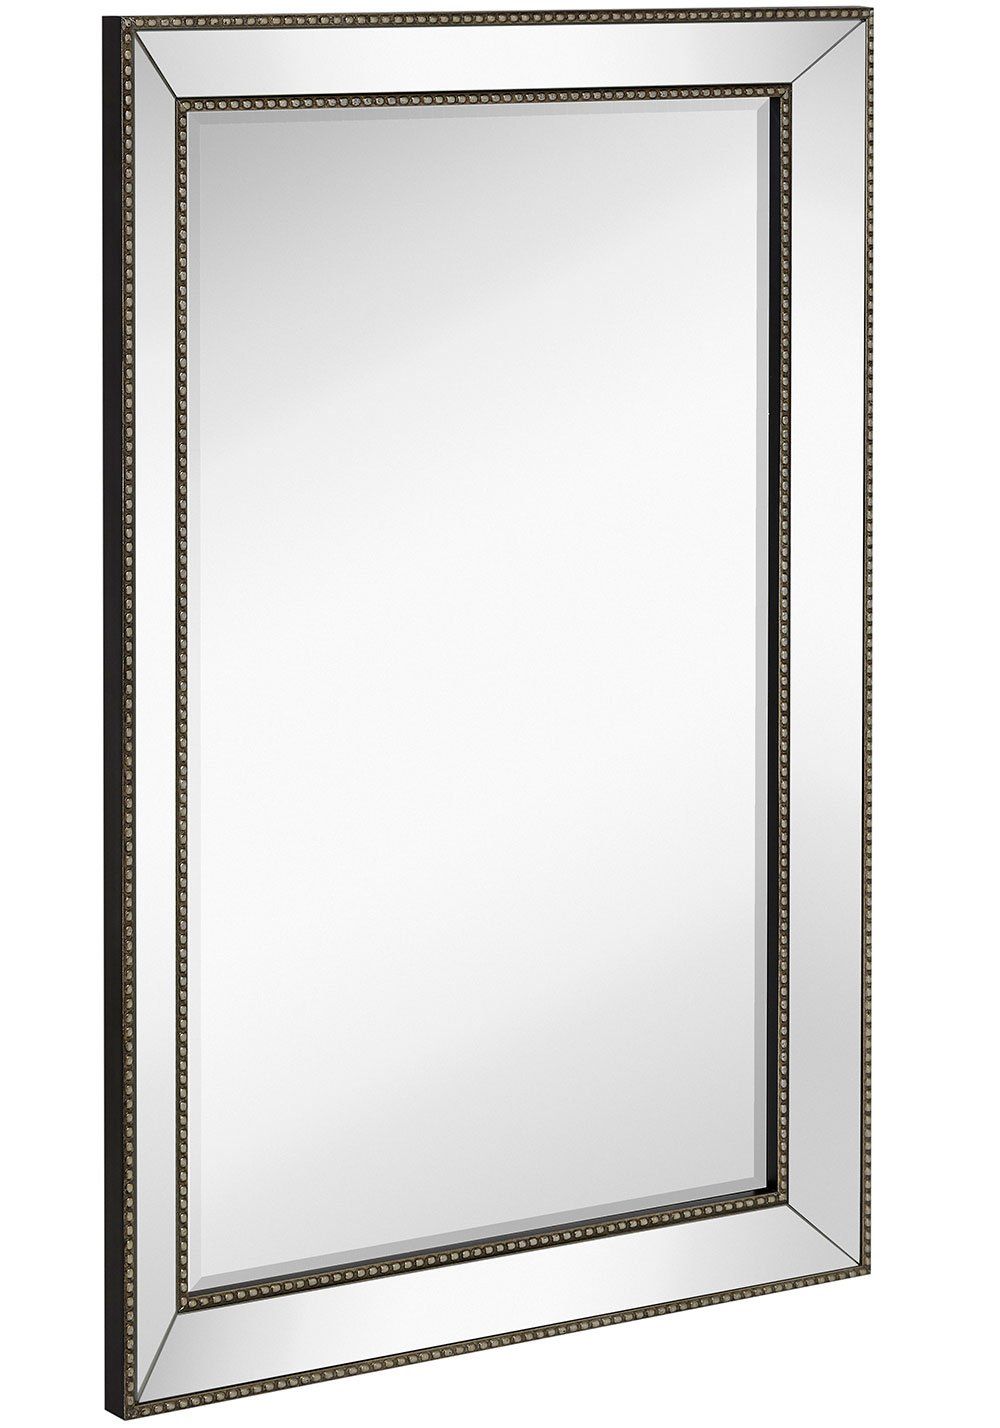 Large Framed Wall Mirror With Angled Beveled Mirror Frame And Beaded With Regard To Bevel Edge Rectangular Wall Mirrors (View 13 of 15)